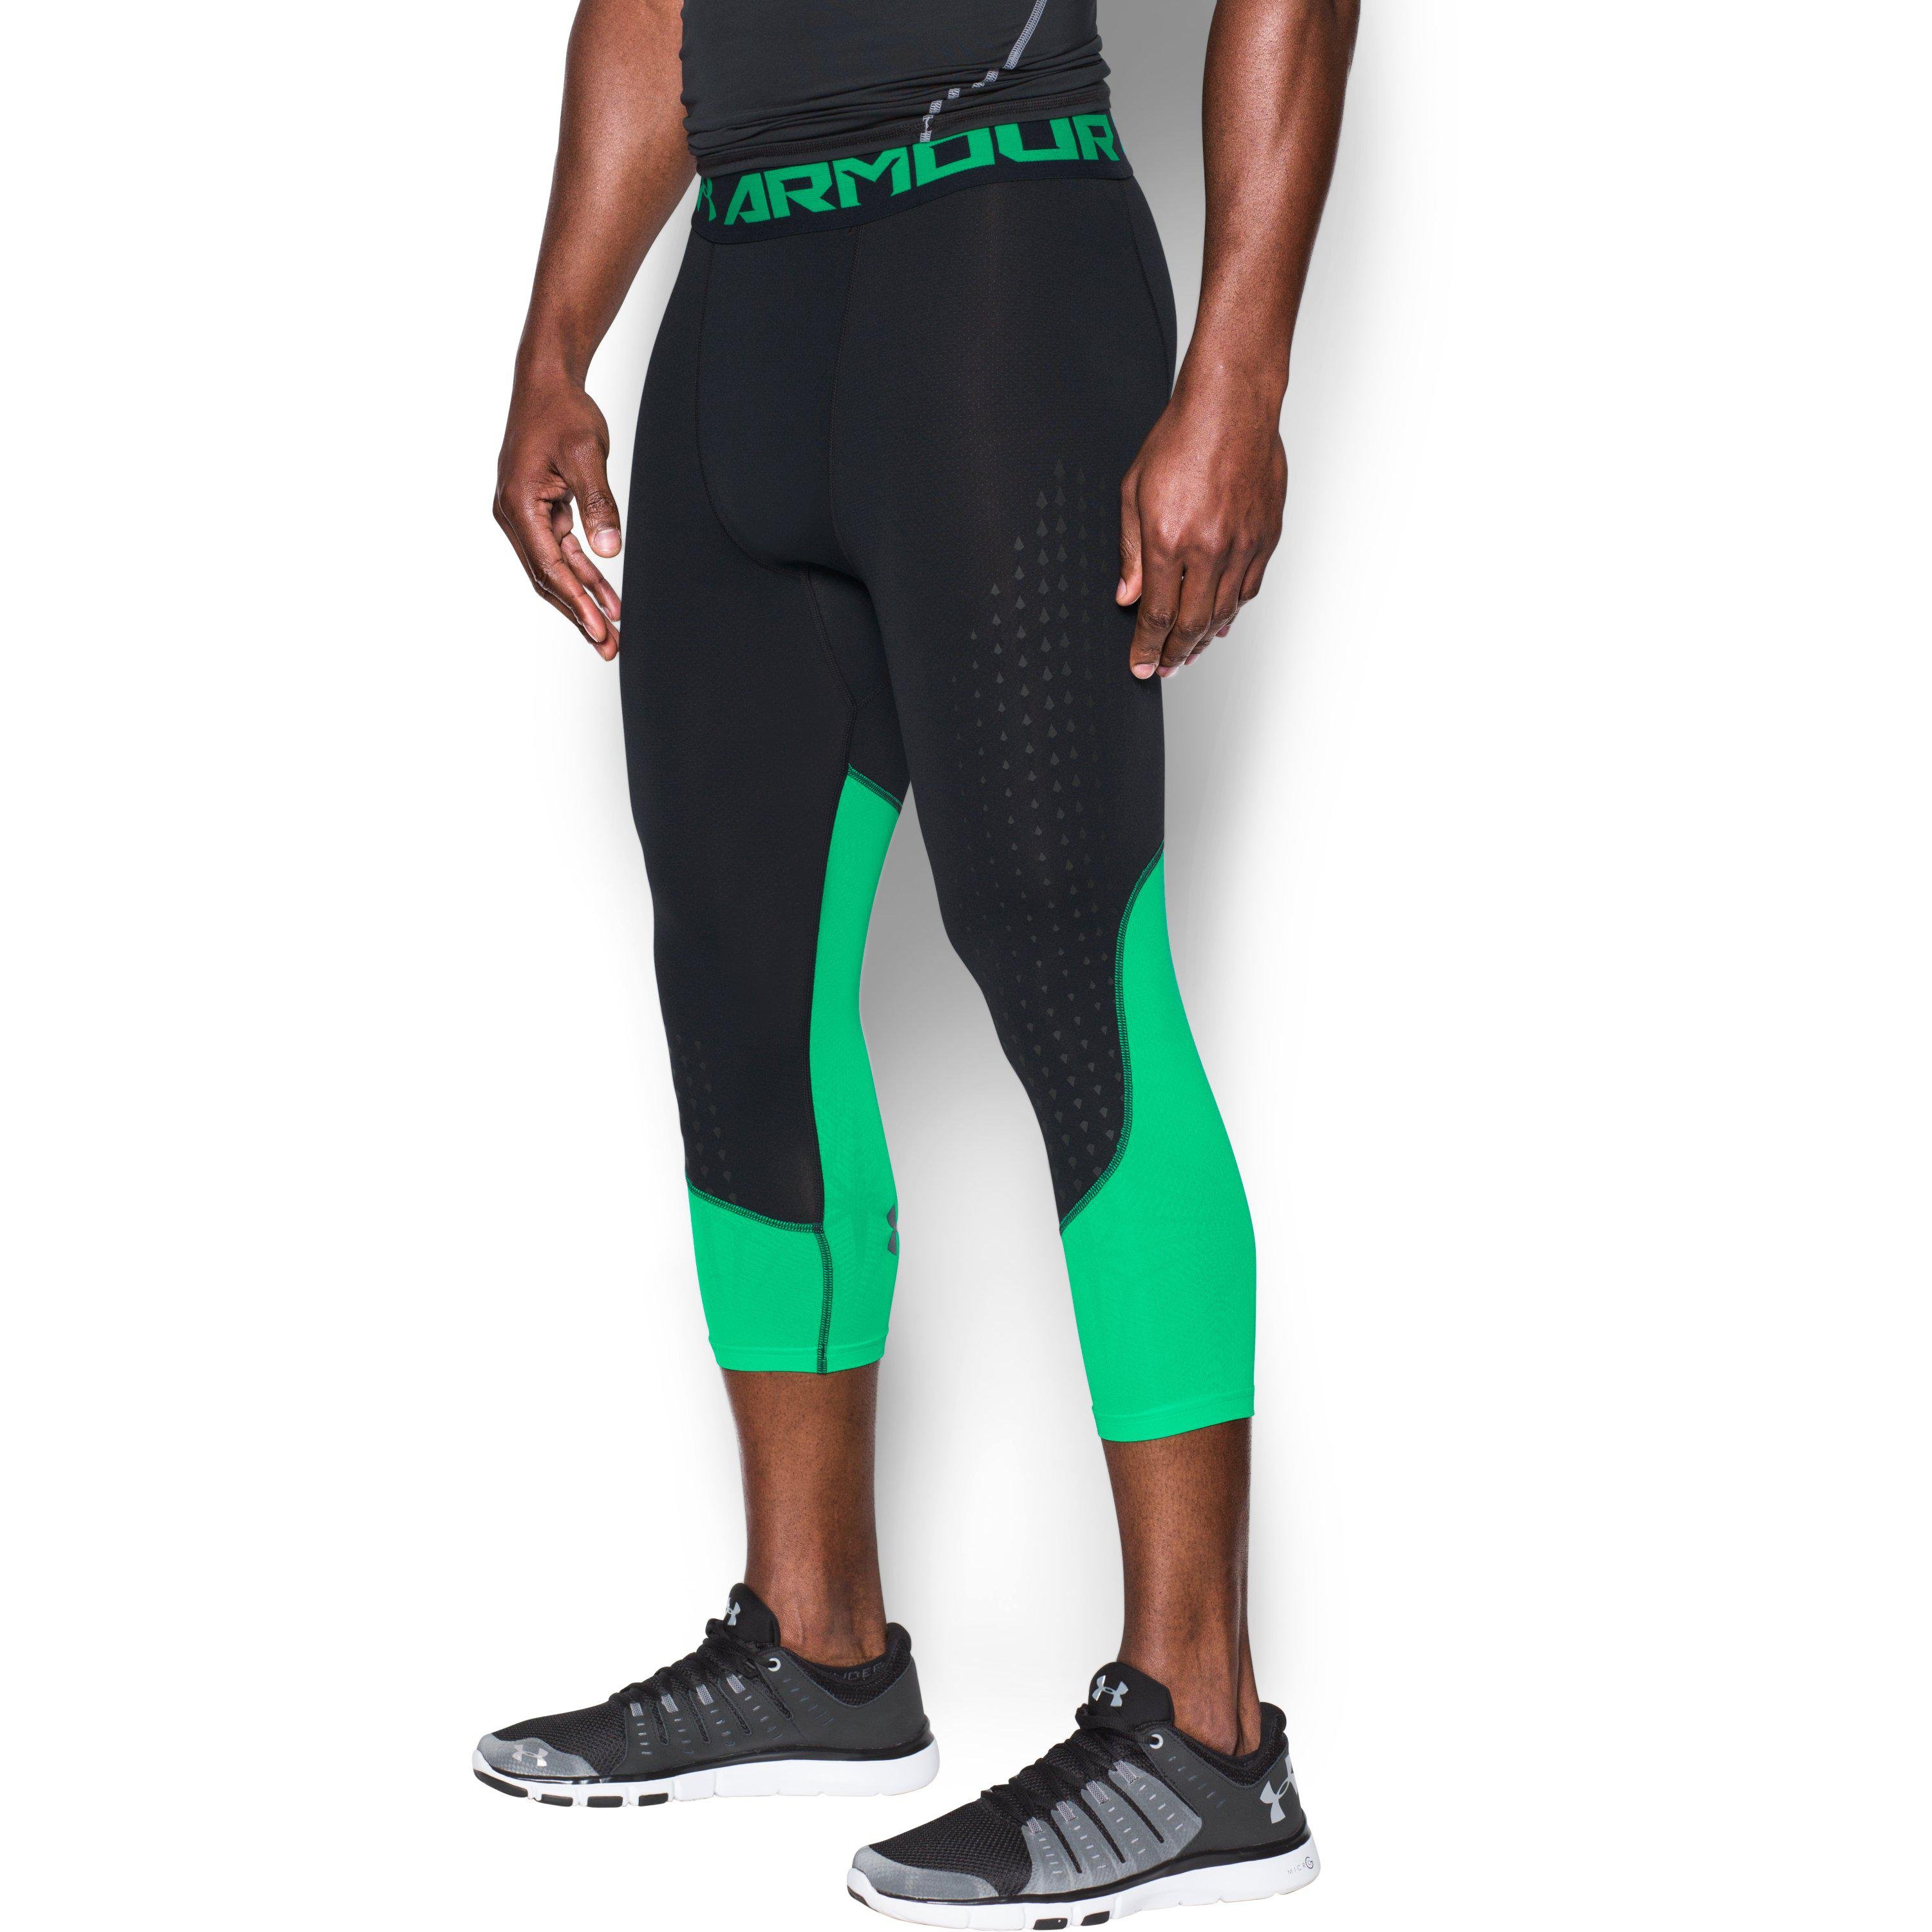 Under Men's Heatgear® Coolswitch Armour 3⁄4 Compression for | Lyst